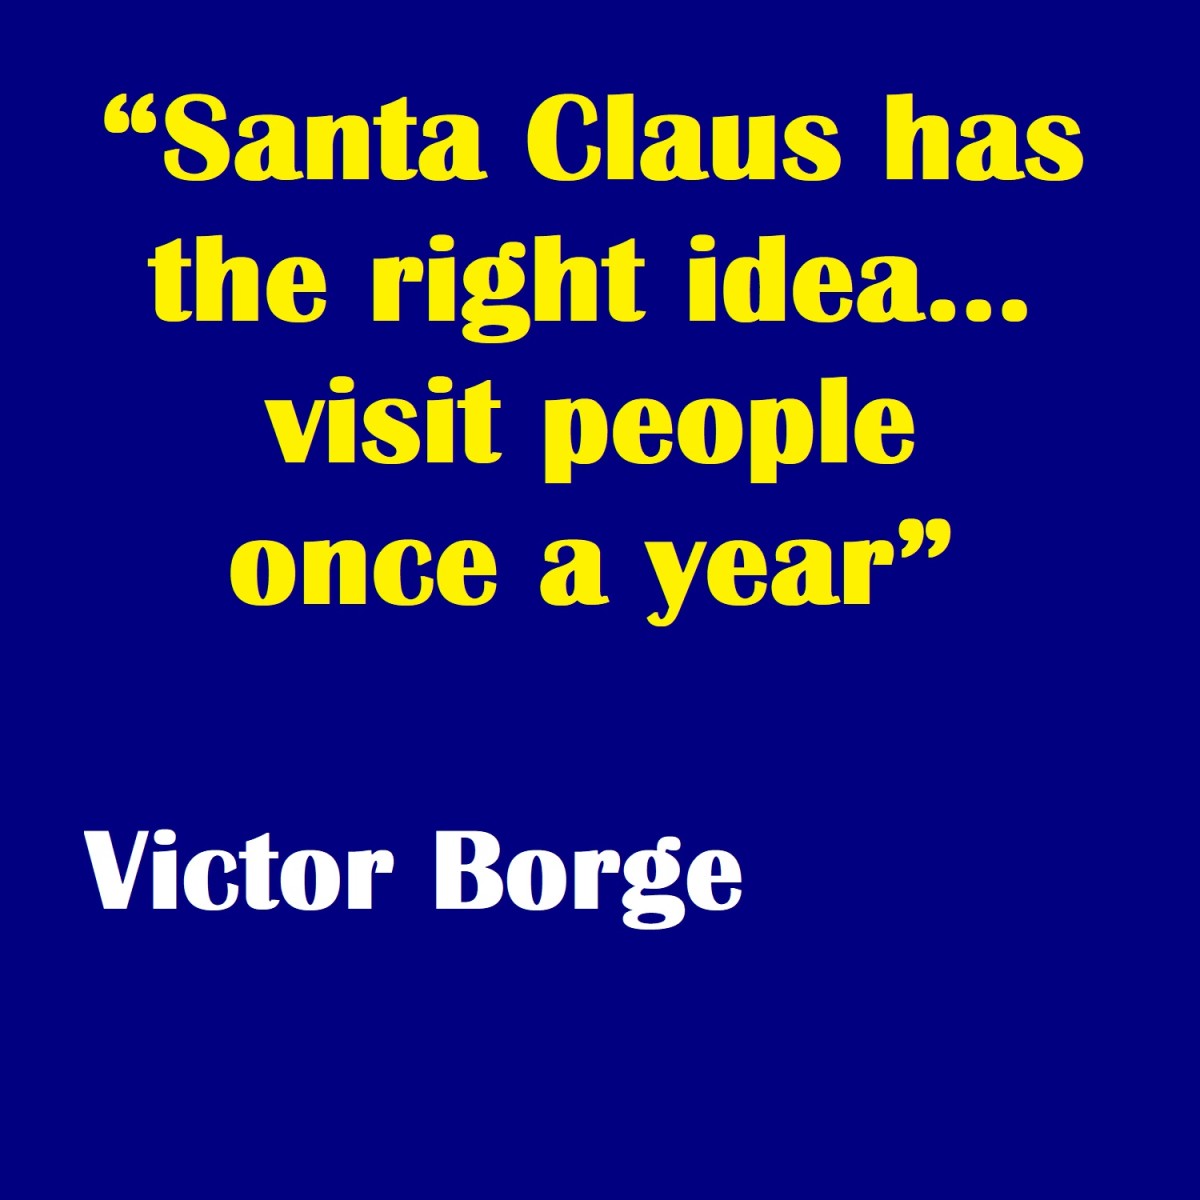 Santa Claus has the right idea... visit people once a year.